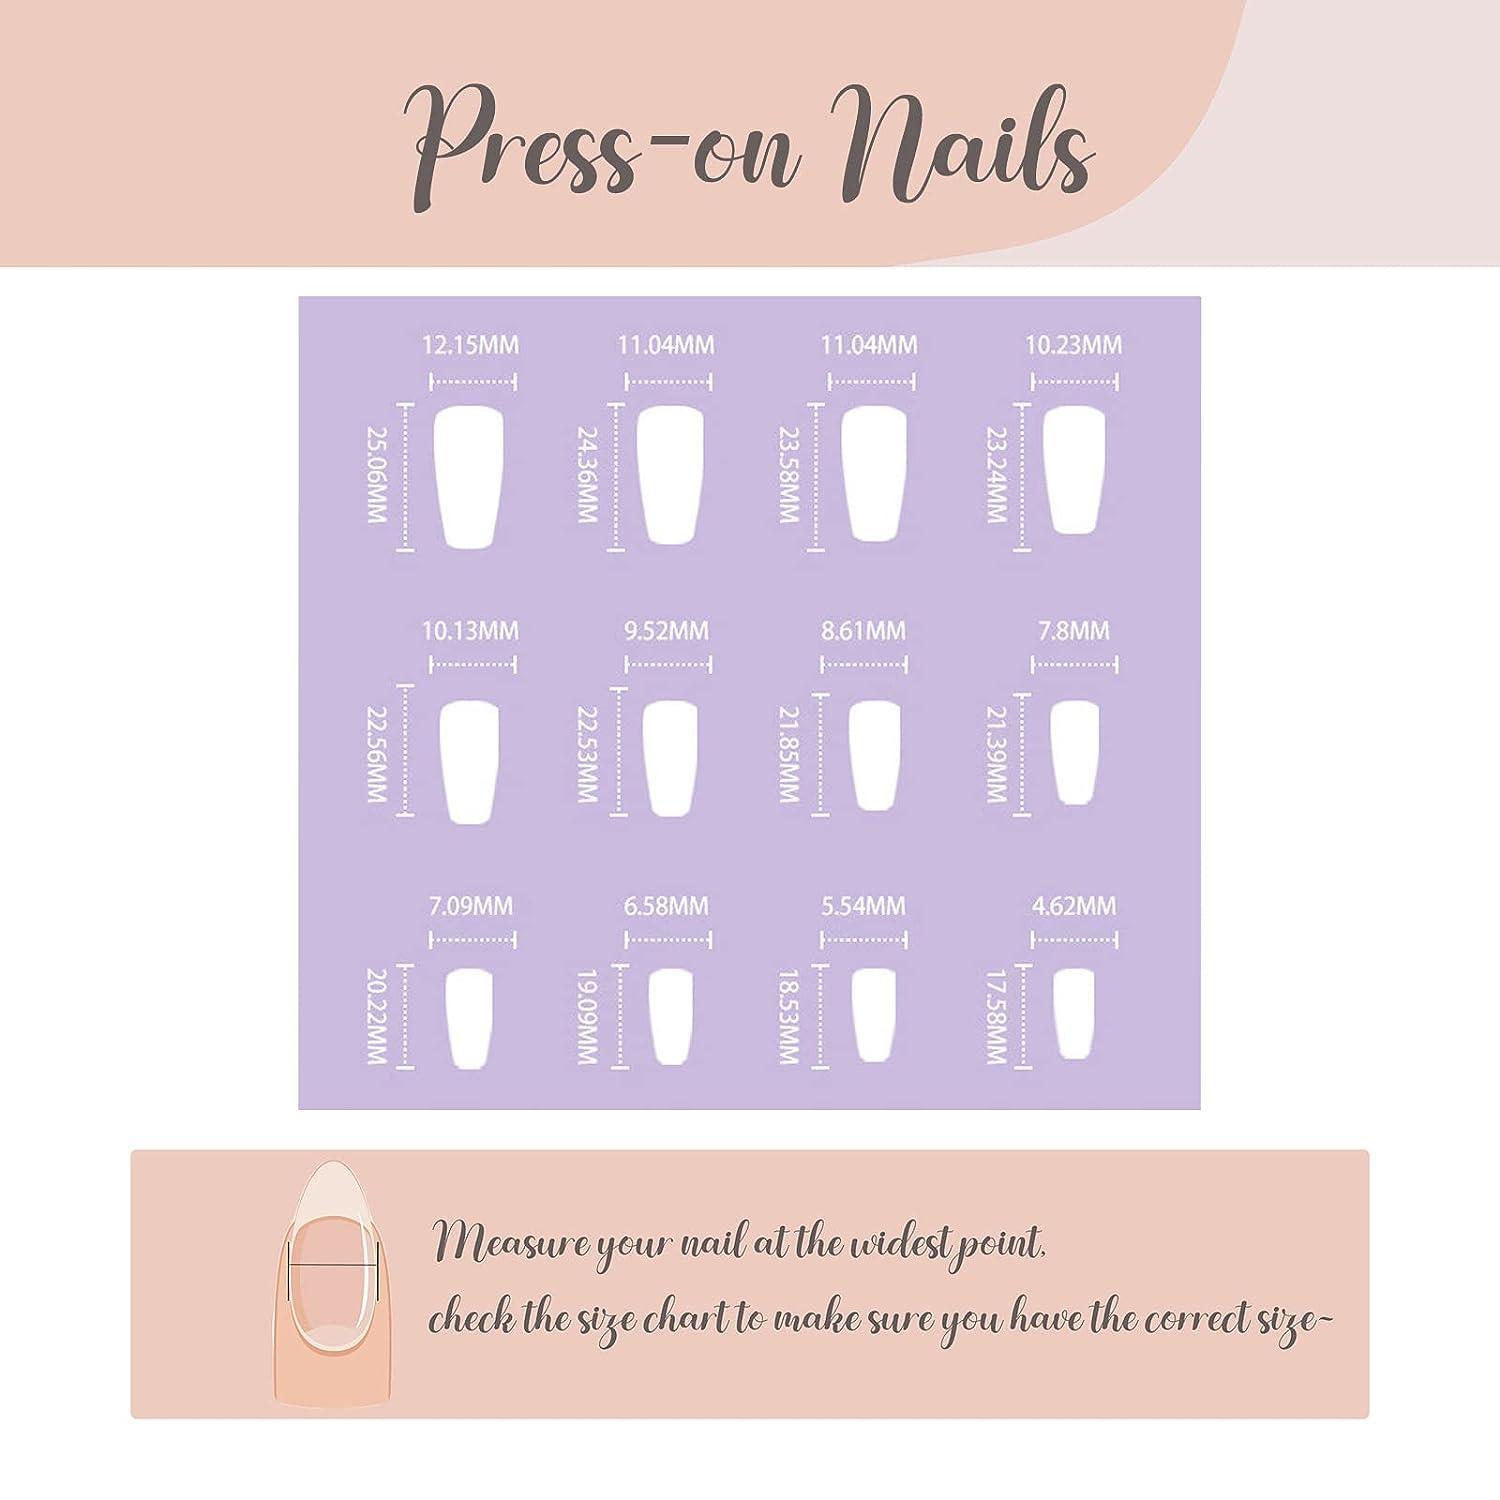  BABALAL Coffin Press on Nails Medium Fake Nails Glossy Glue on  Nails Flame Flash Pattern 24Pcs Ballerina Acrylic Nails for Women and Girls  : Beauty & Personal Care